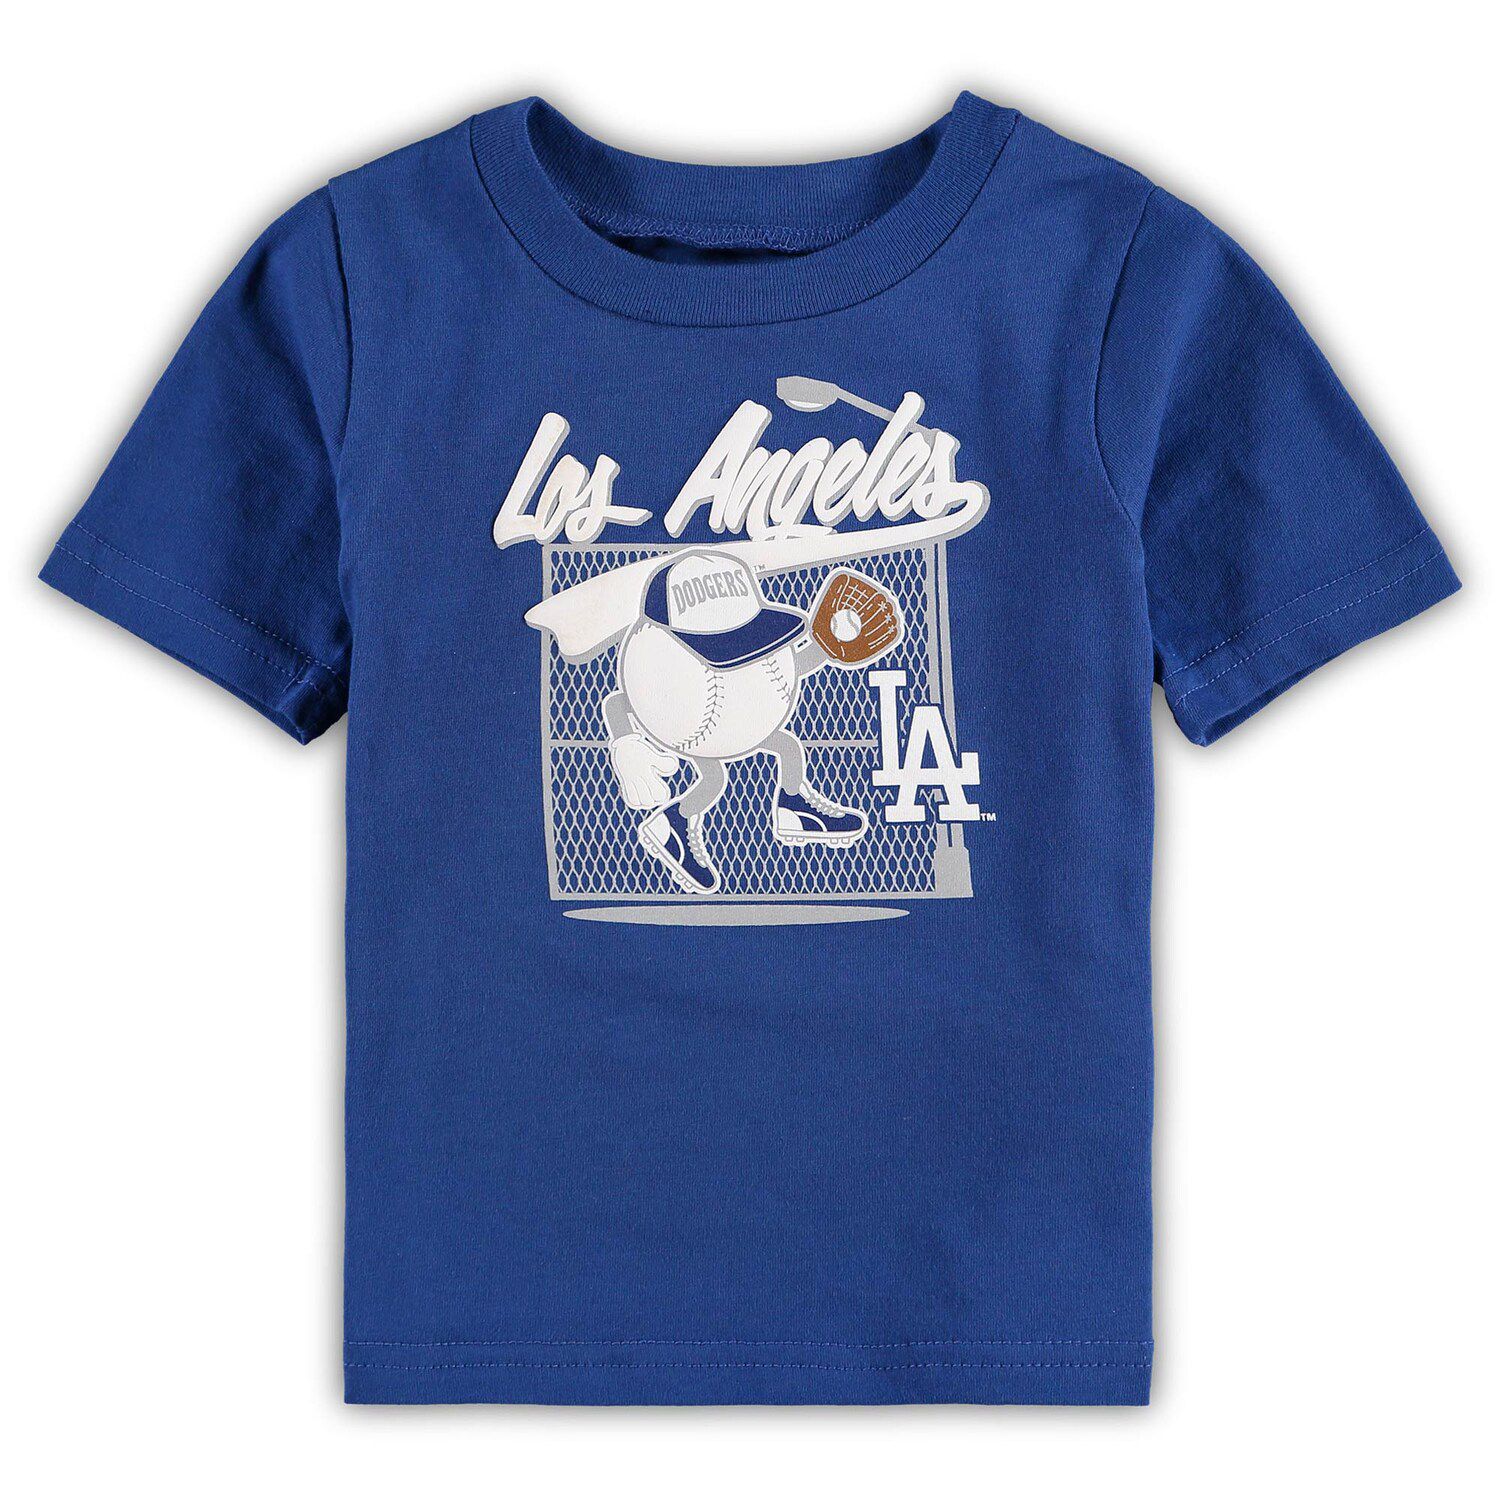 Pro Standard Men's Red/Royal Los Angeles Dodgers Red White and Blue Dip Dye T-Shirt Size: Small